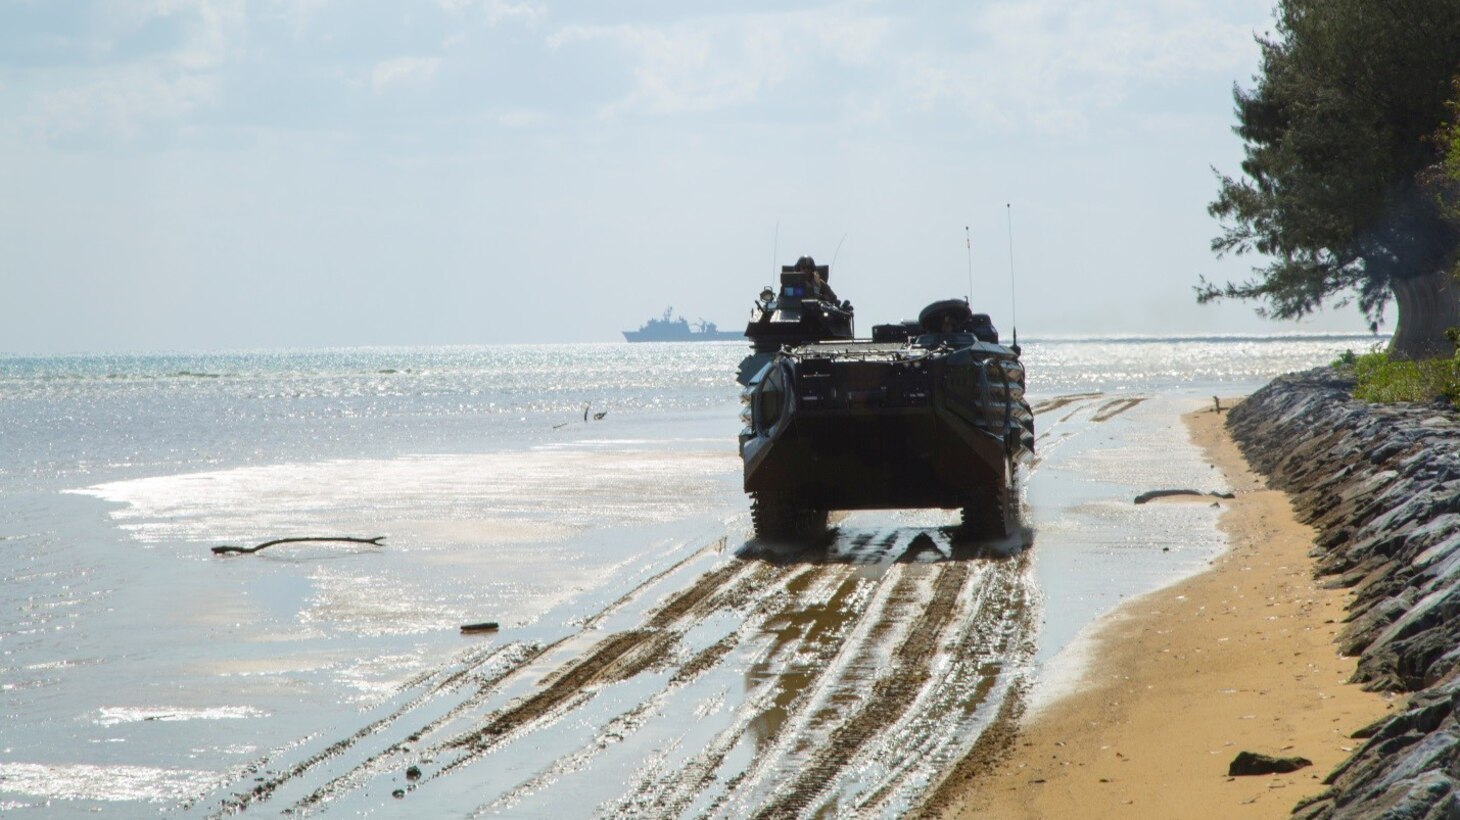 An assault amphibious vehicle maneuvers its way across a beach during an amphibious assault exercise March 15 aboard Kushi Crossing, Okinawa, Japan. Waves of AAVs loaded with 31st Marine Expeditionary Unit Marines disembarked the USS Bonhomme Richard and stormed the beach during the exercise. Amphibious operations training is one of the many scenarios the 31st MEU conducts during their 2017 spring deployment. 